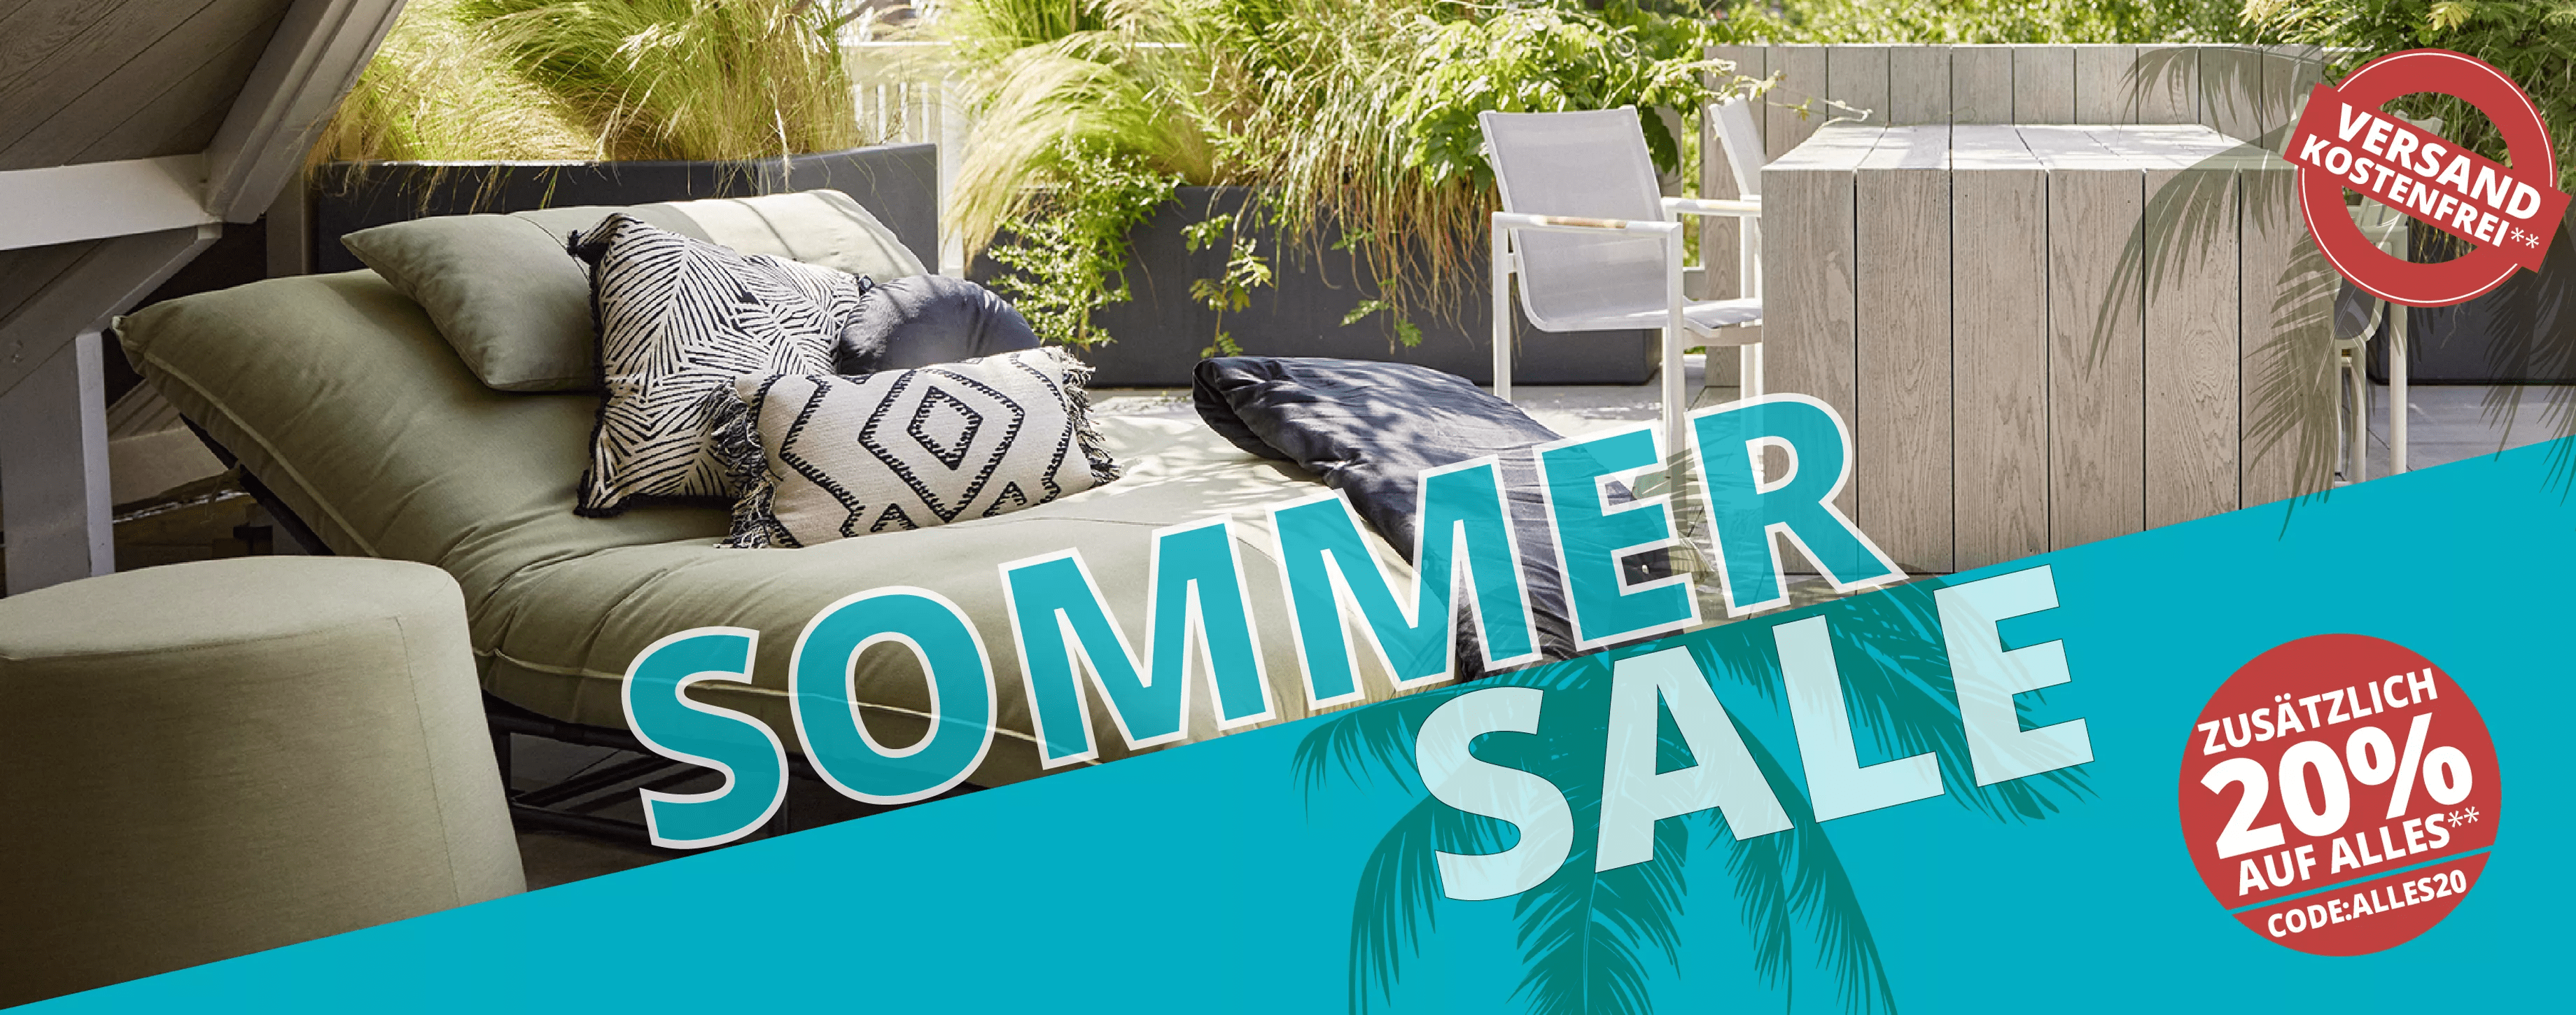 Sommersale20 Homepage BannerLD